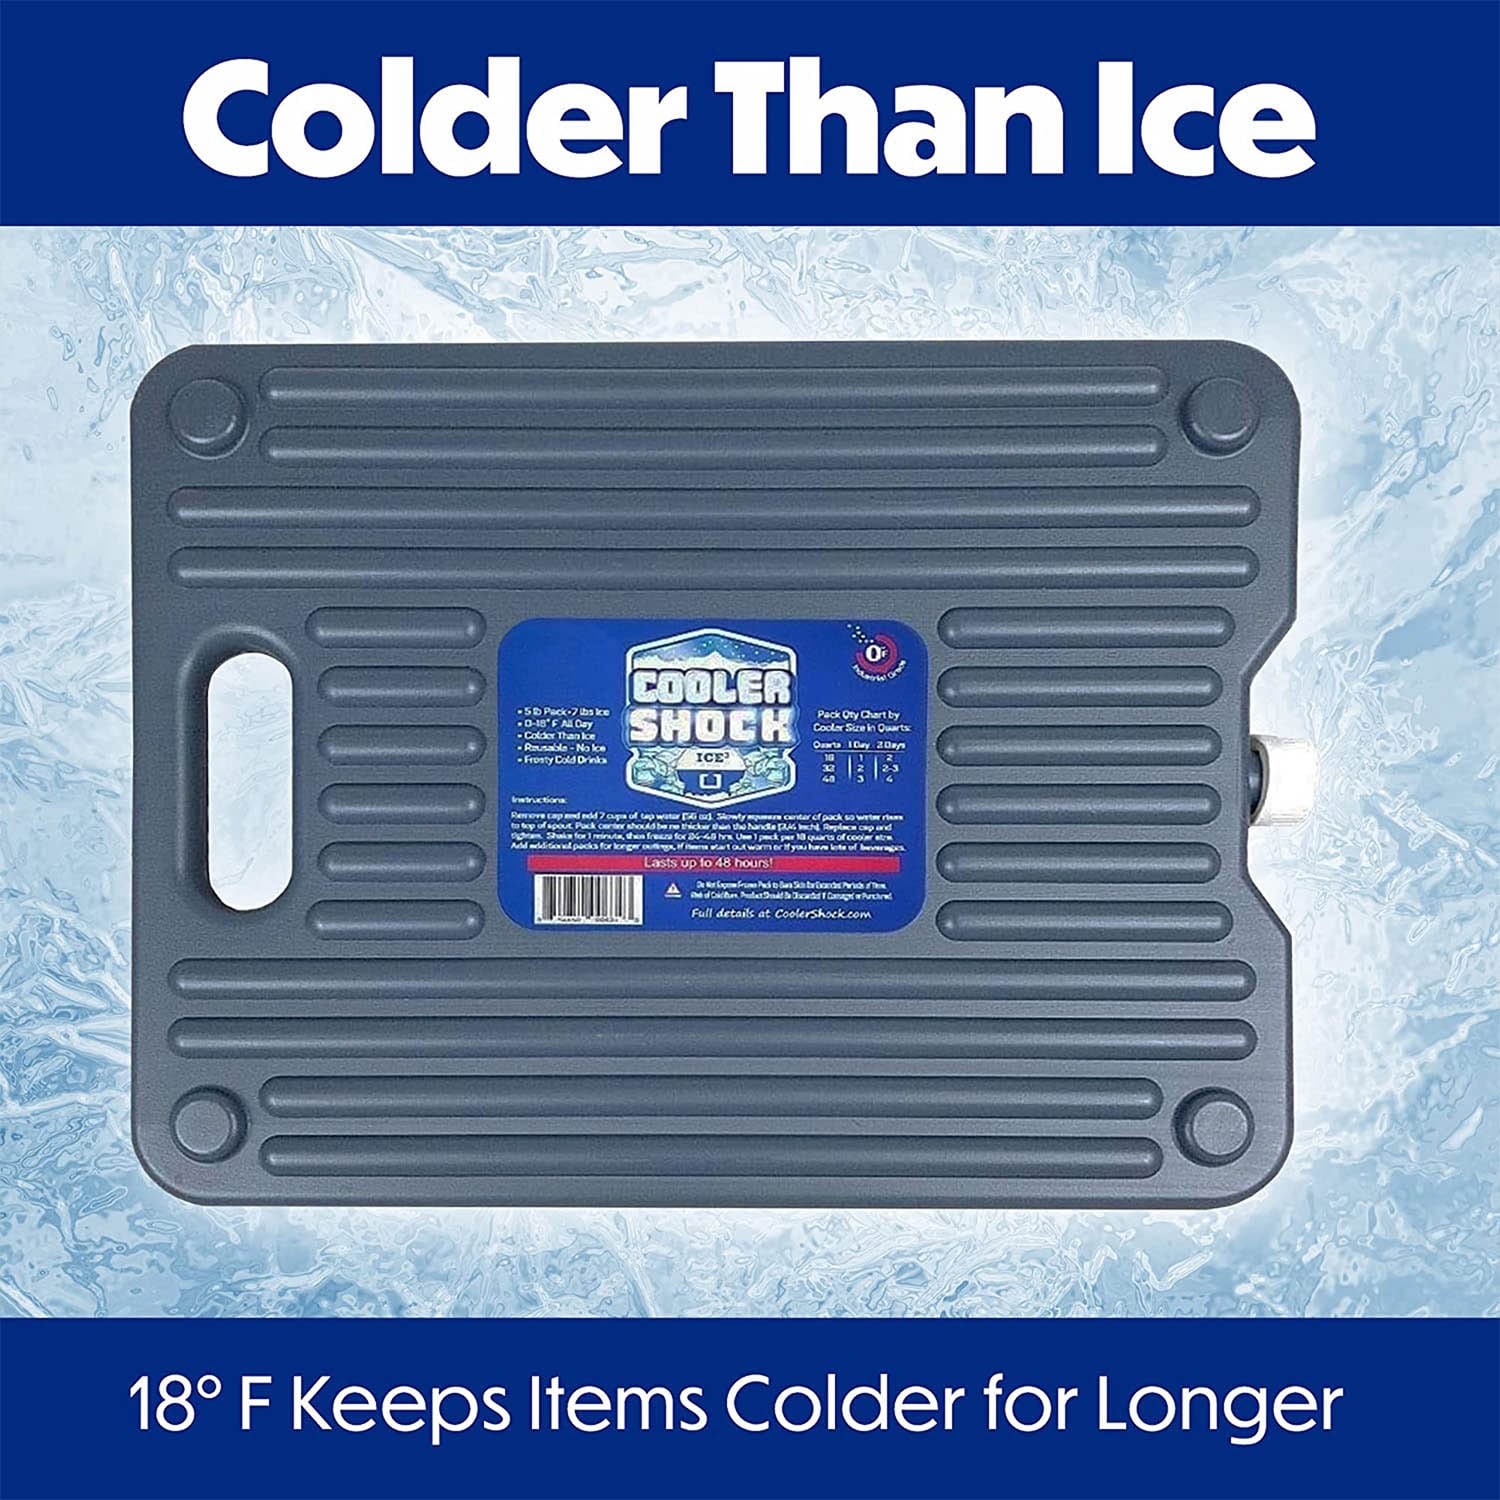 Cooler Shock 2.1 lbs. 2-Pack Gray Liquid Ice Pack in the Ice Packs